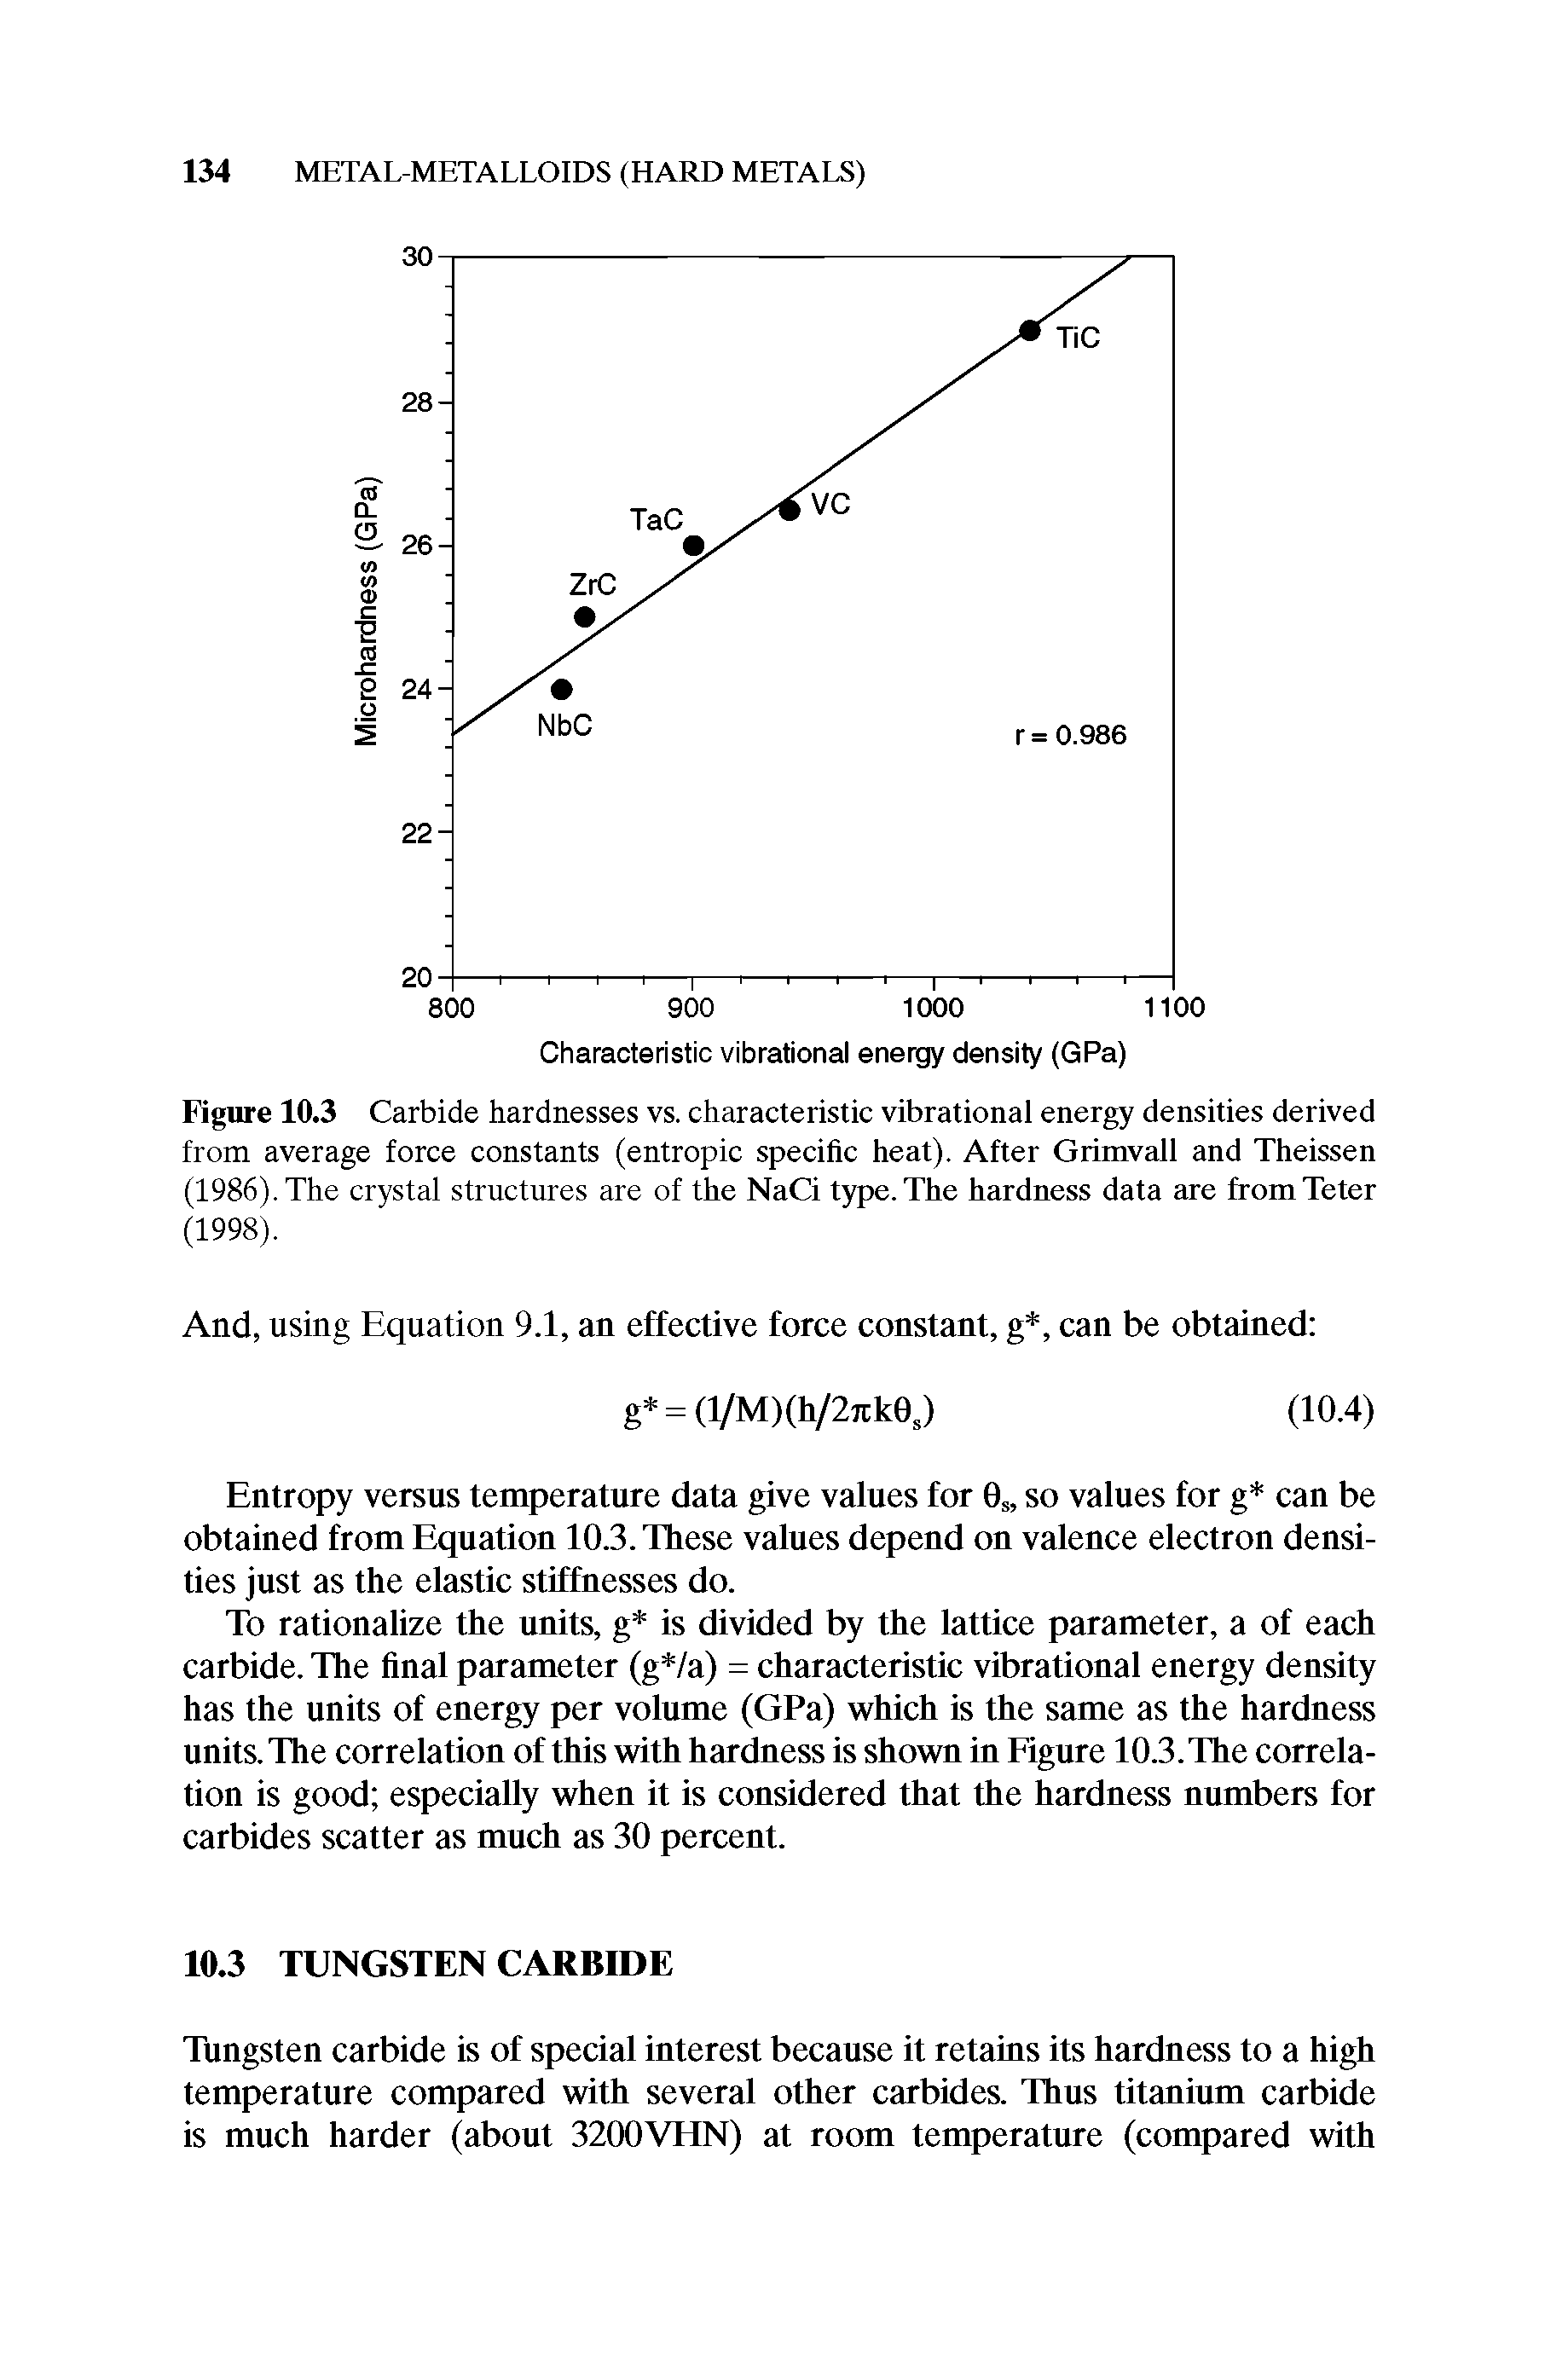 Figure 10.3 Carbide hardnesses vs. characteristic vibrational energy densities derived from average force constants (entropic specific heat). After Grimvall and Theissen (1986). The crystal structures are of the NaCi type. The hardness data are fromTeter (1998).